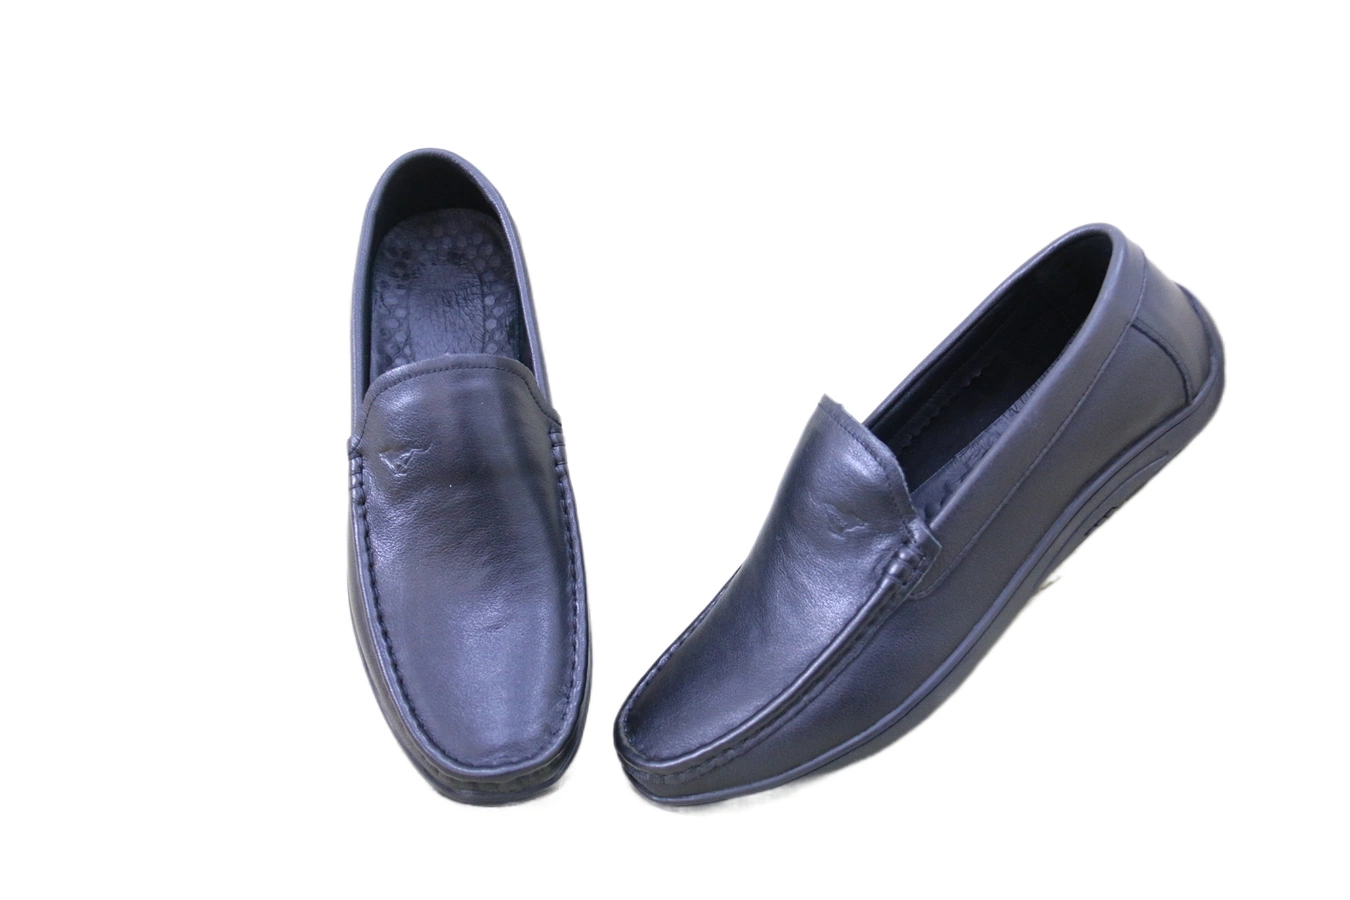 Classic Outdoor Travel Soft Rubber Sole Leather Business hombres Ocio Zapatillas informales